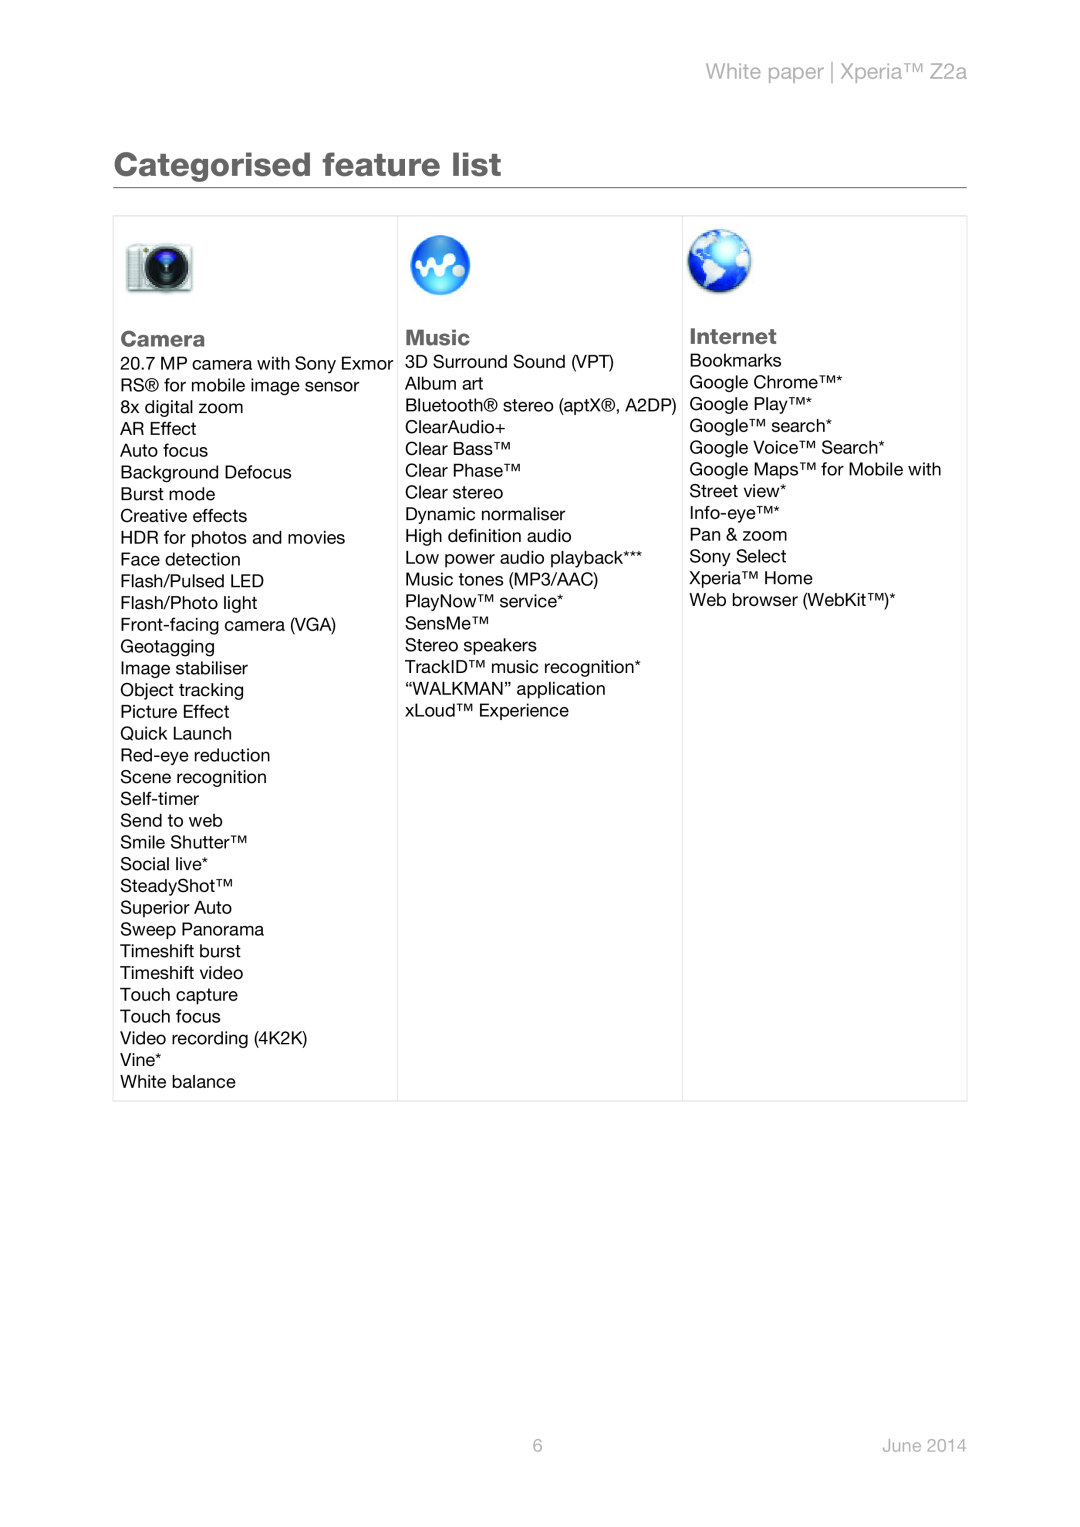 Sony manual Categorised feature list, Camera, Music, Internet, White paper Xperia Z2a, June 